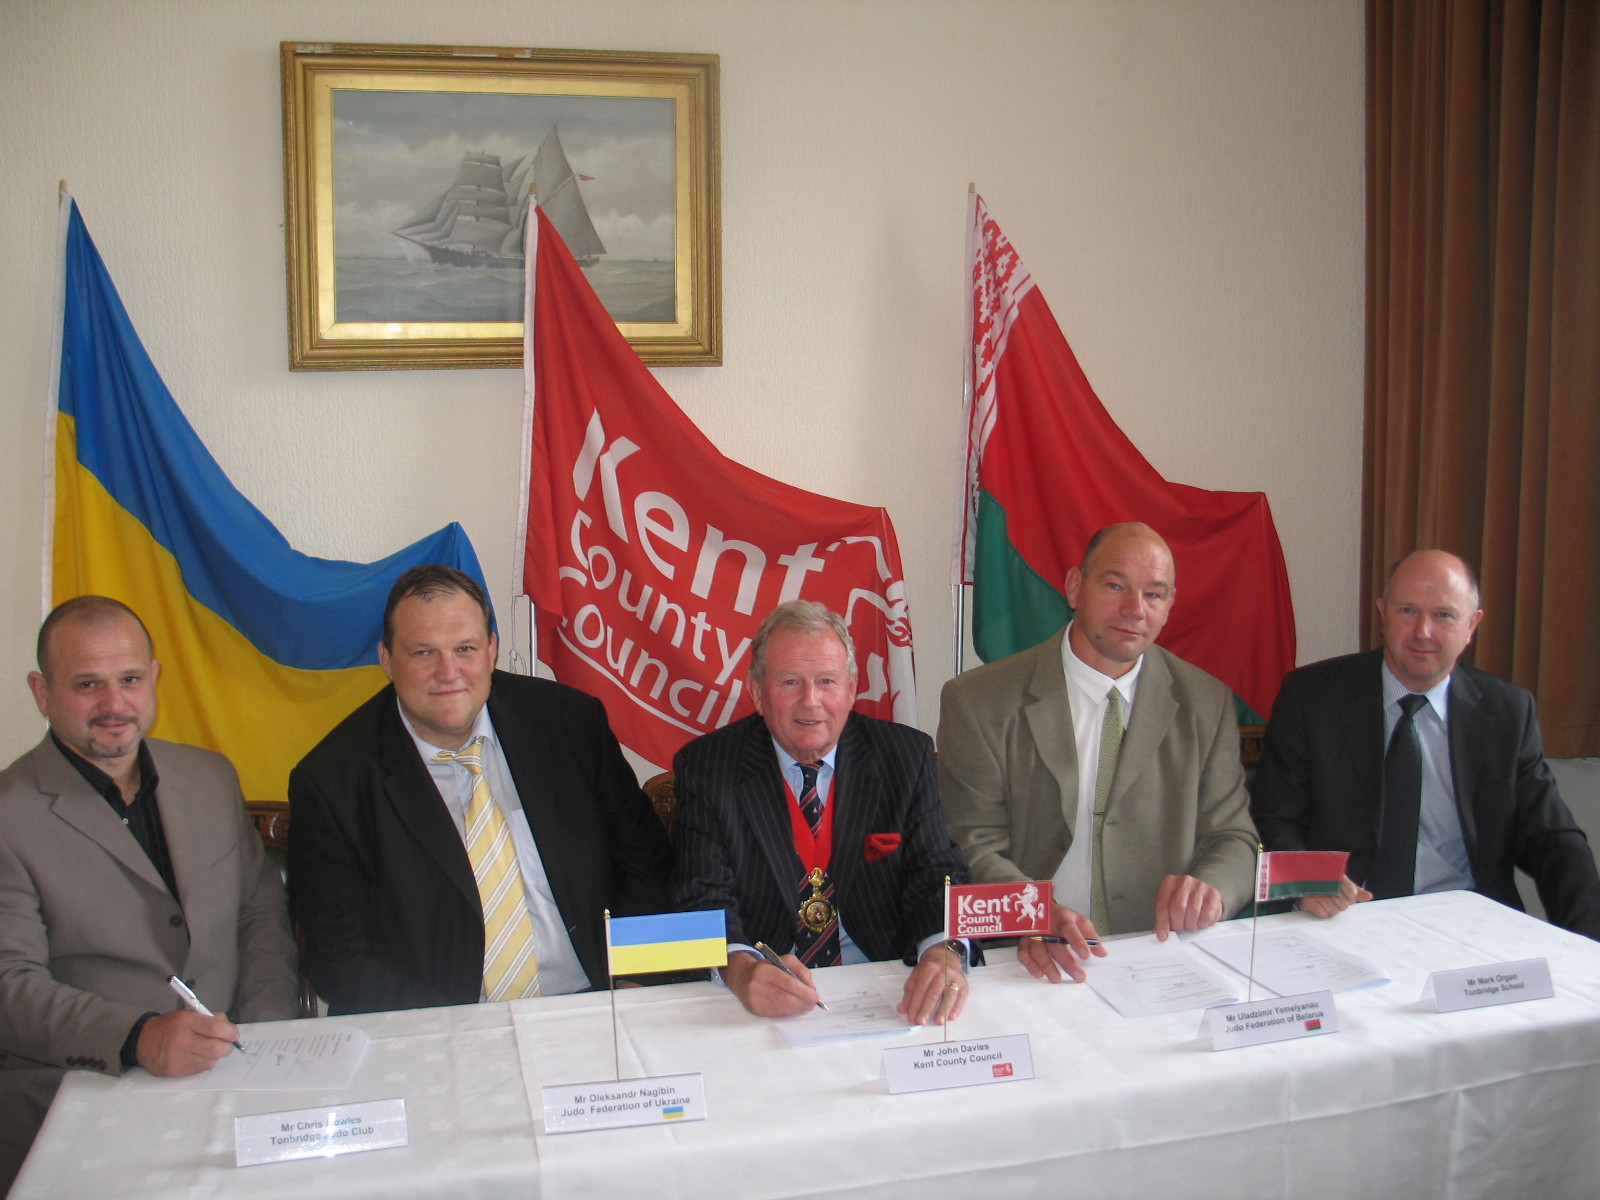 Belarus and Ukraine signed a deal to base themselves at pre-Games training camps in Kent before London 2012 ©Kent County Council